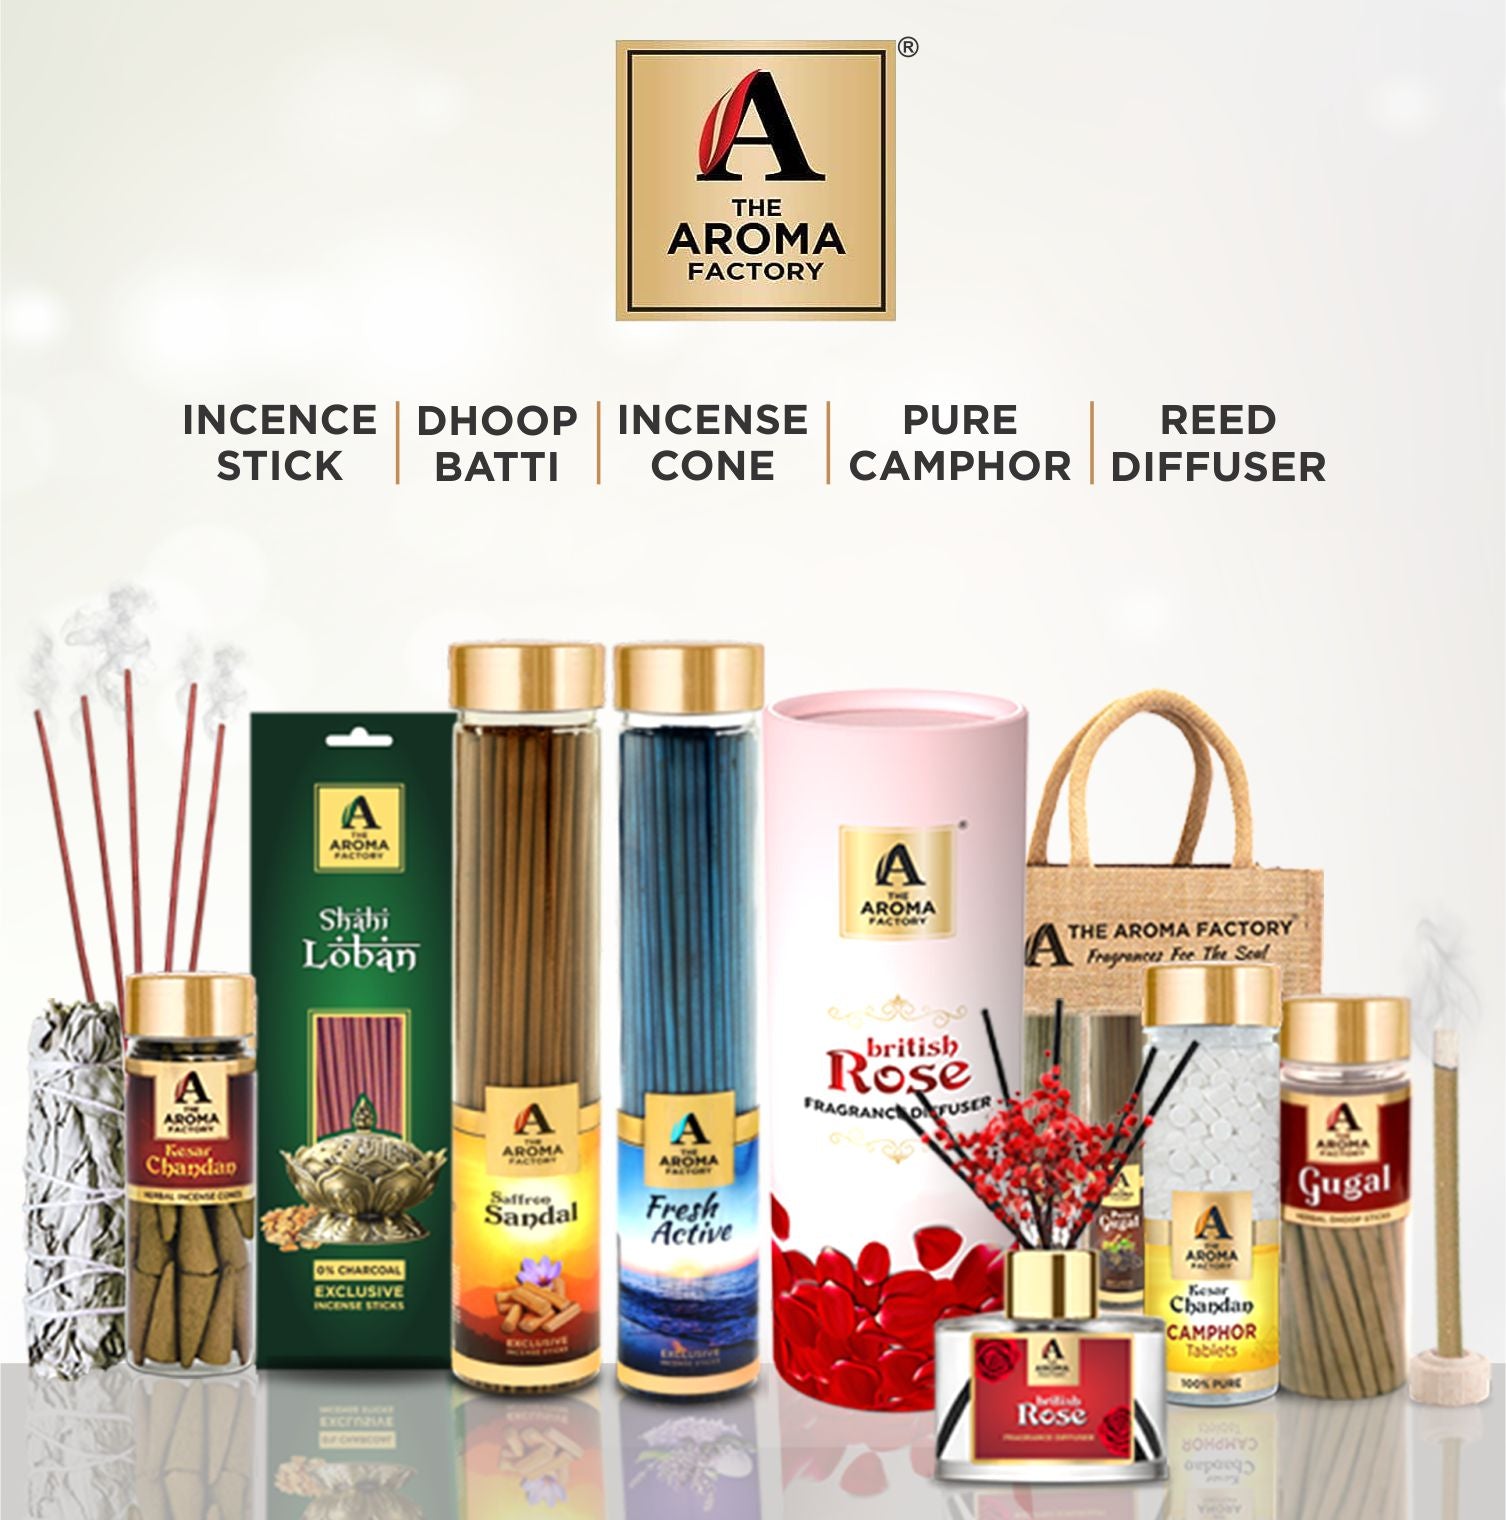 The Aroma Factory Best Father/Dad Gift with Card, Citrus Lemon Fragrance Reed Diffuser Set (1 Box &1 Card)